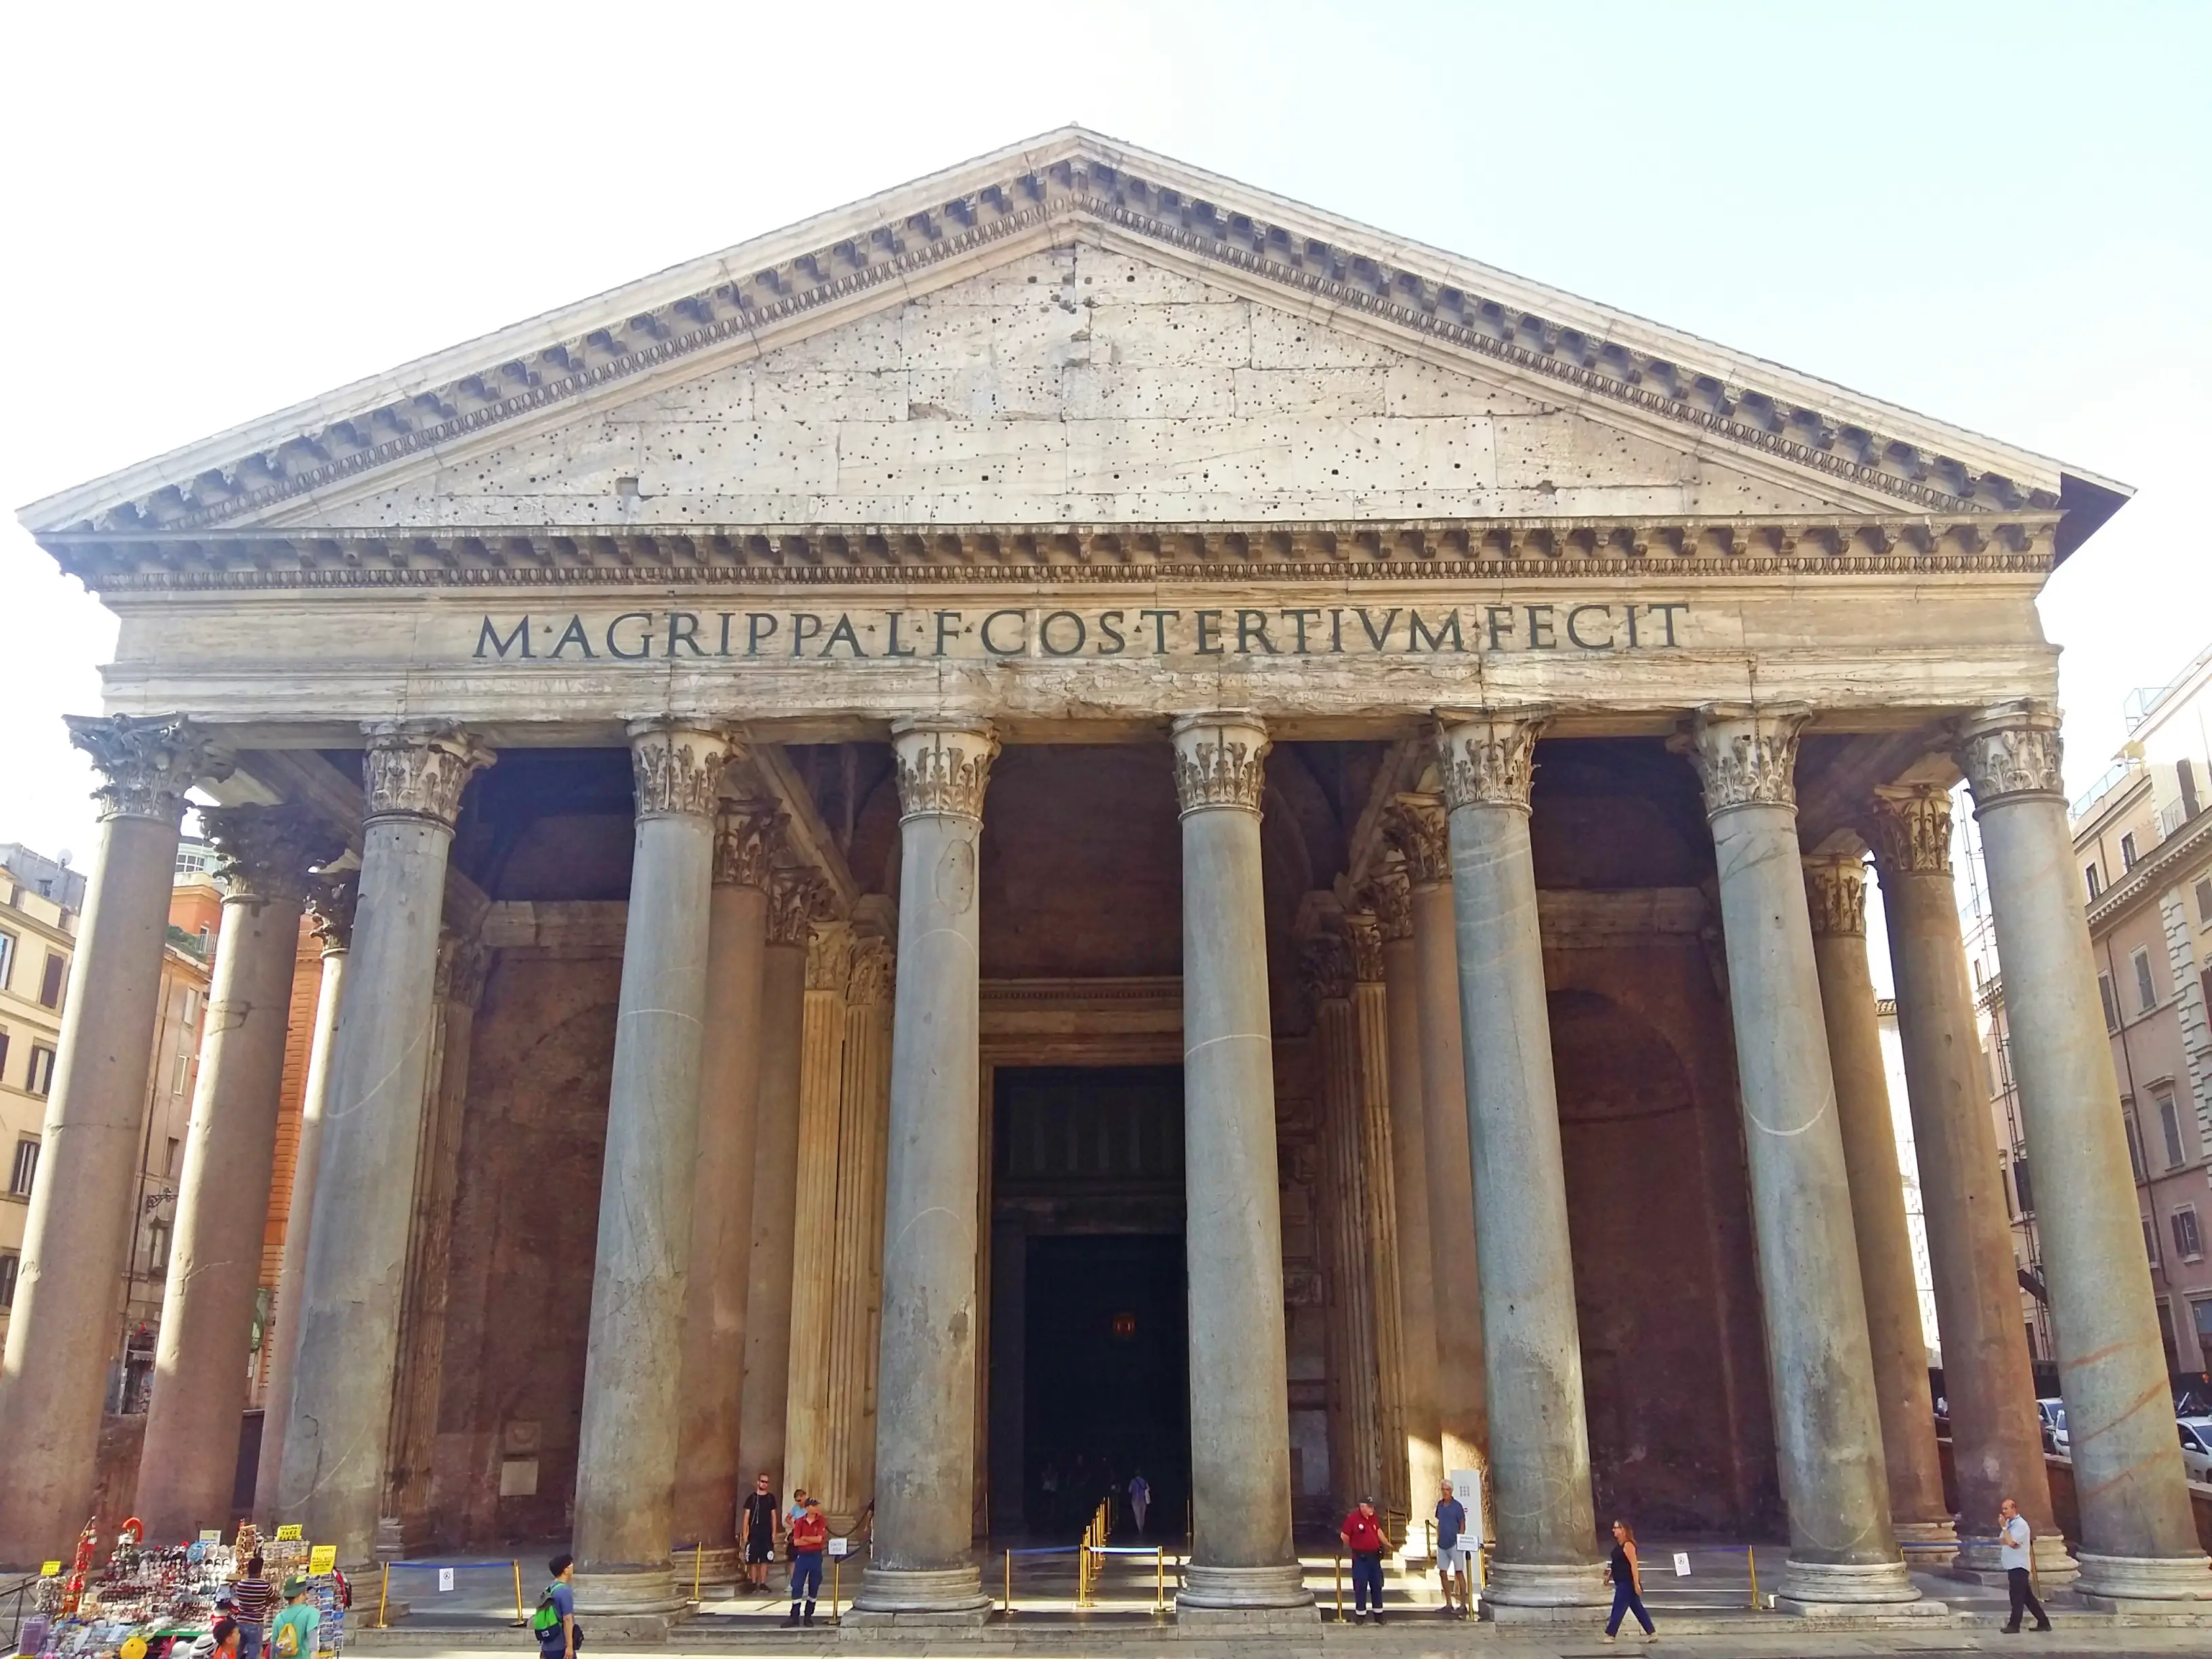 must have experiences in rome away from the tourist attractions